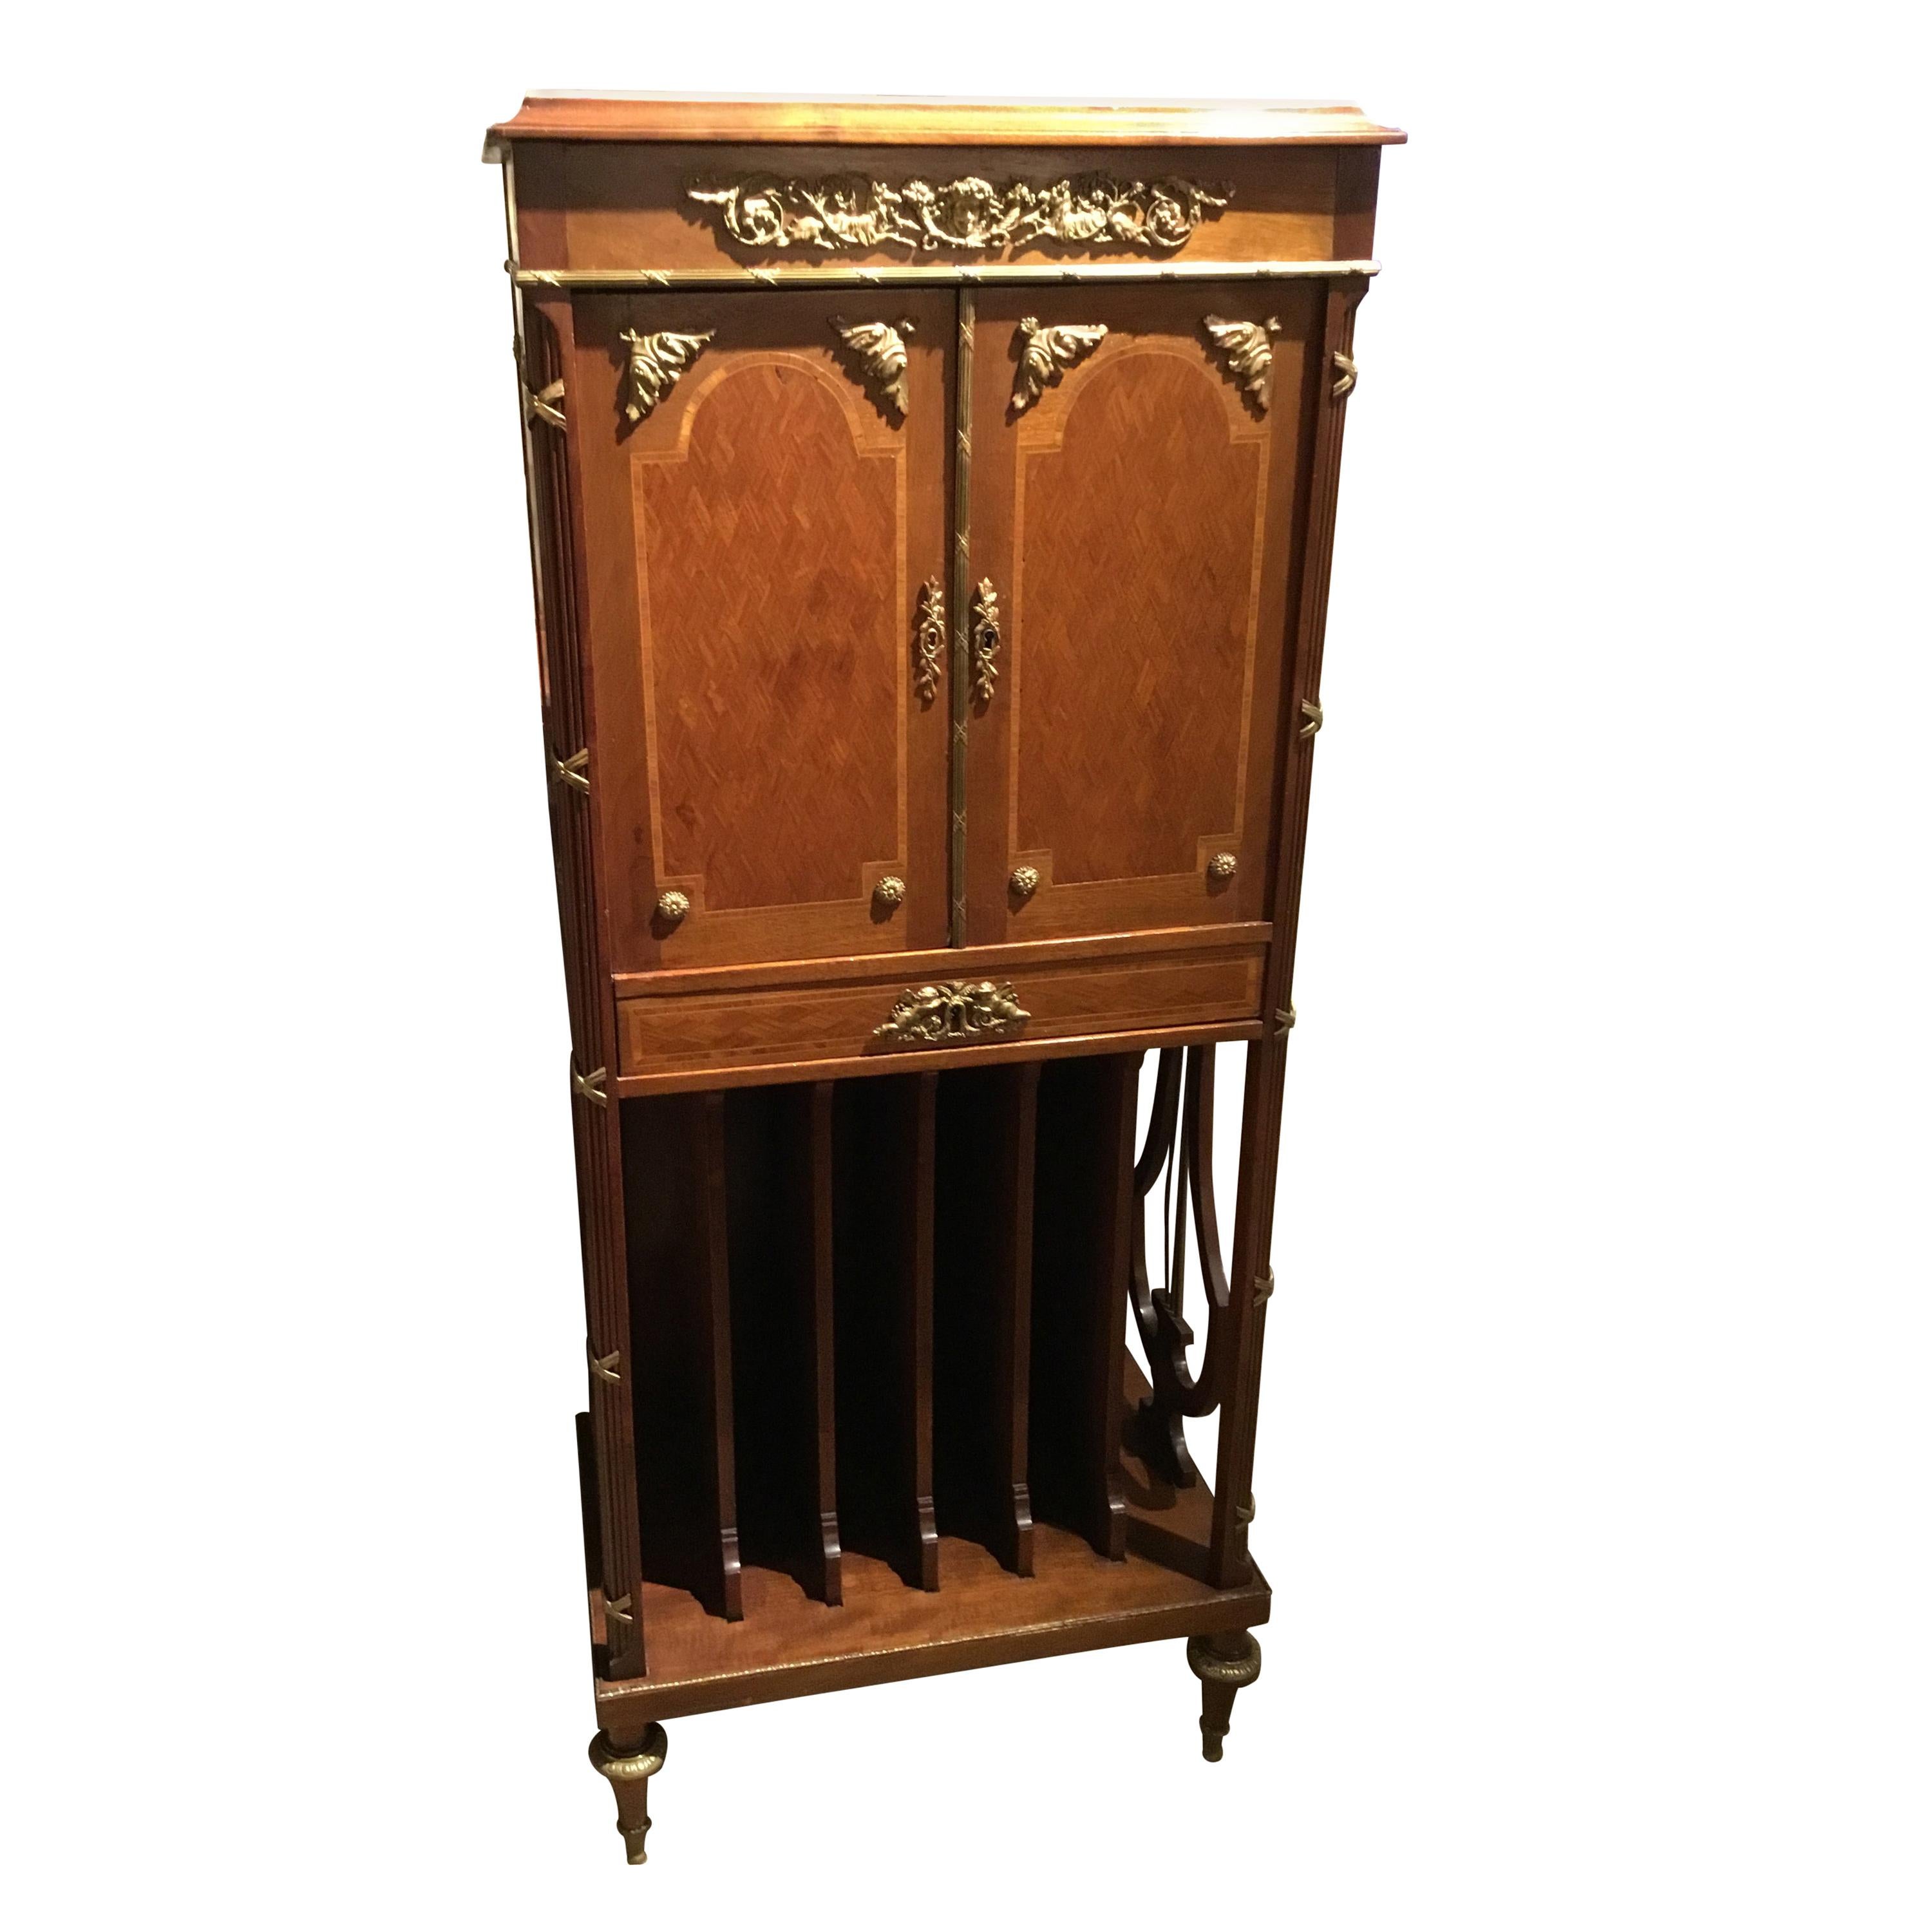 French Music Cabinet, 19th Century with Marquetry and Bronze Mounts, Marble Top